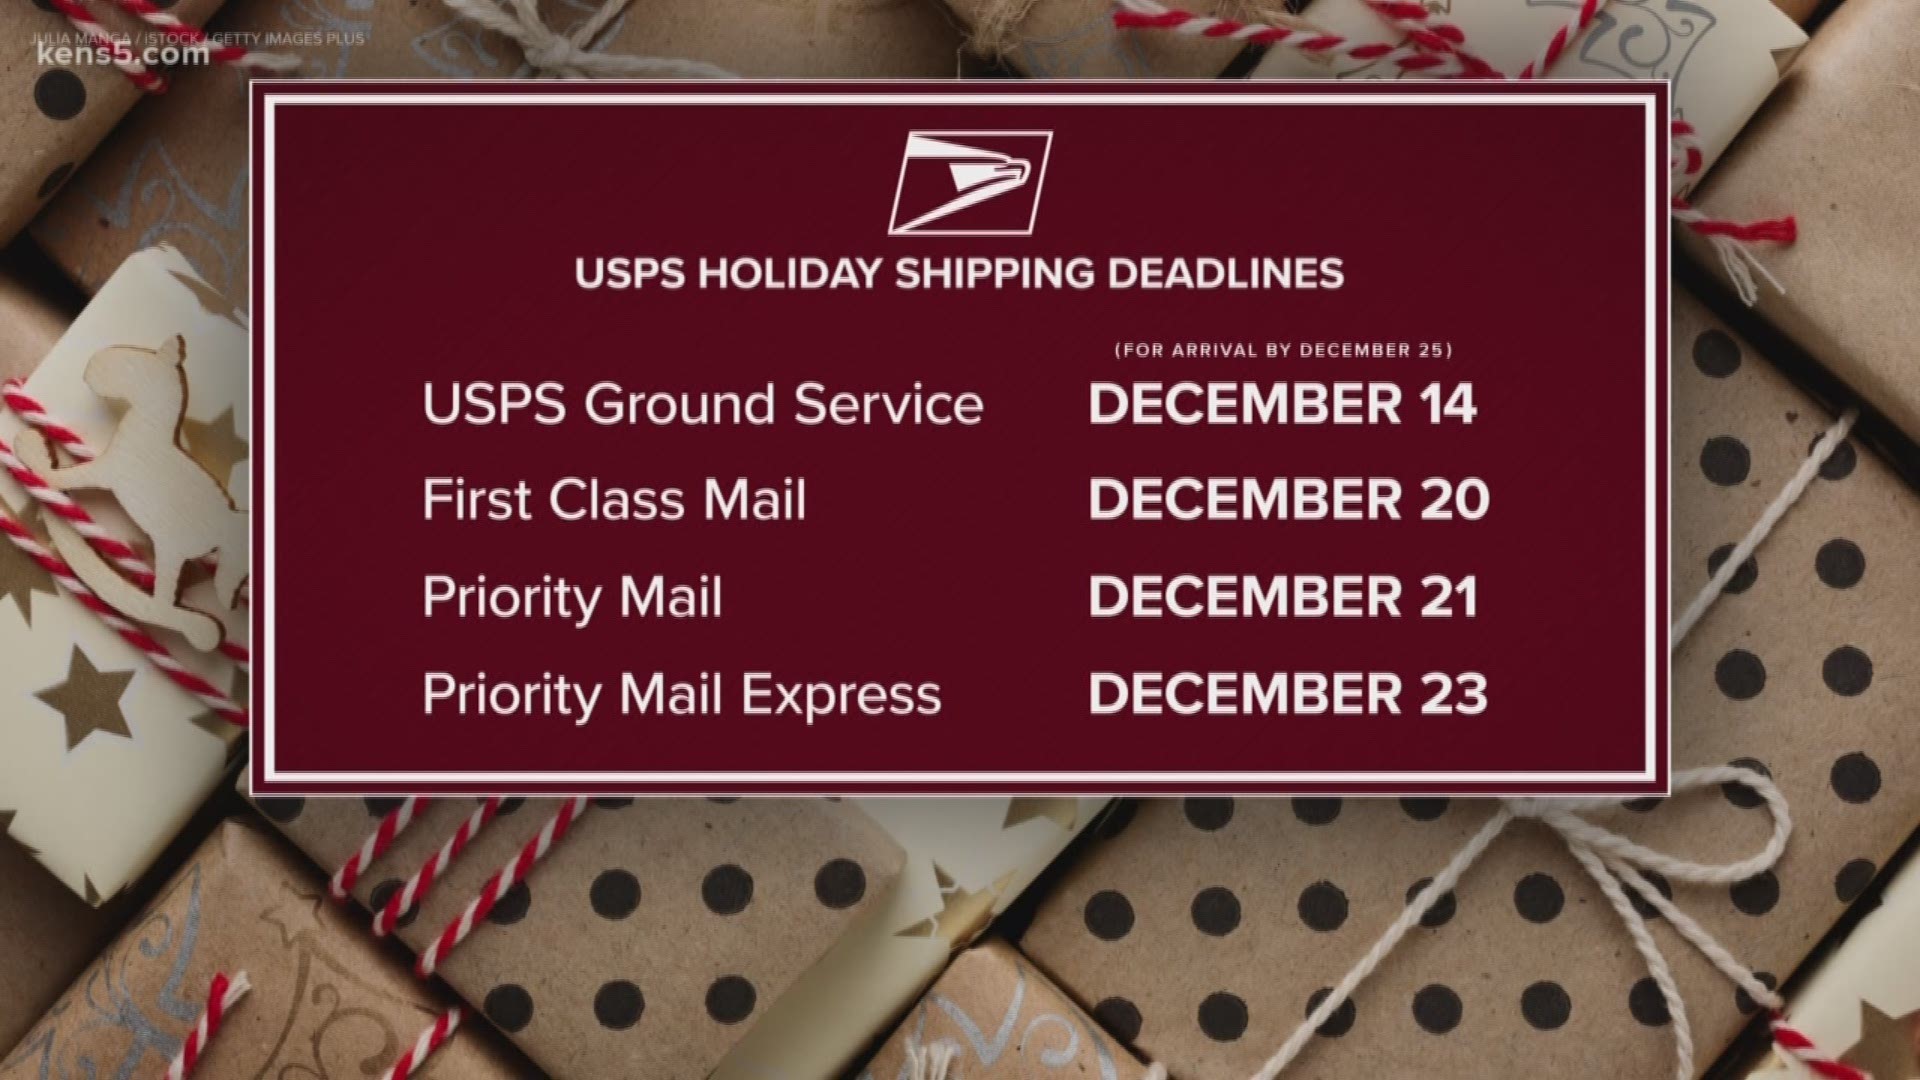 If you're busy with last-minute Christmas card mailing or gift shipping-- you're not alone!